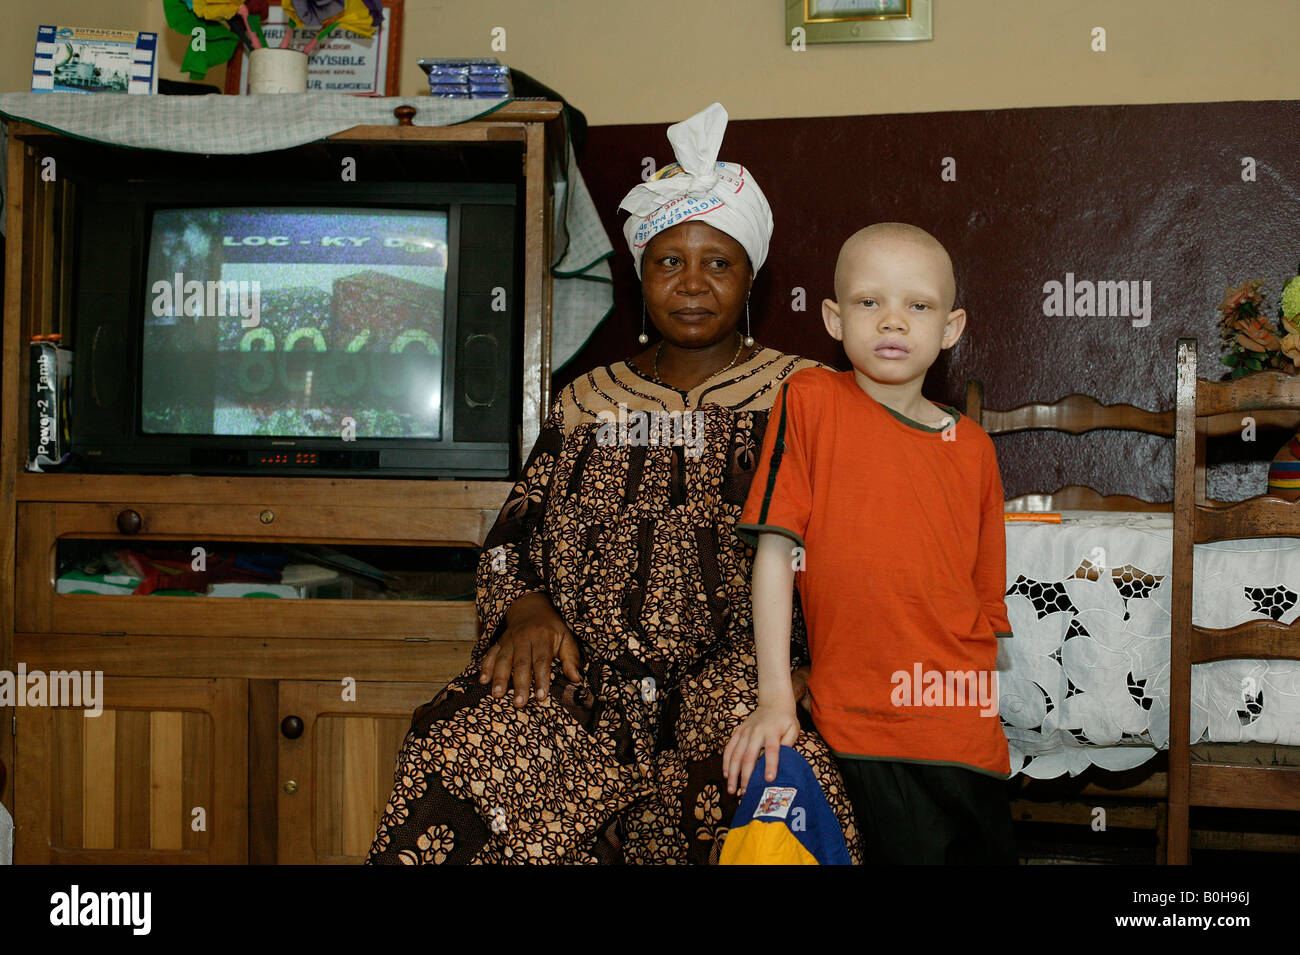 Mother and her albino son beside the television in their living room, Douala, Cameroon, Africa Stock Photo